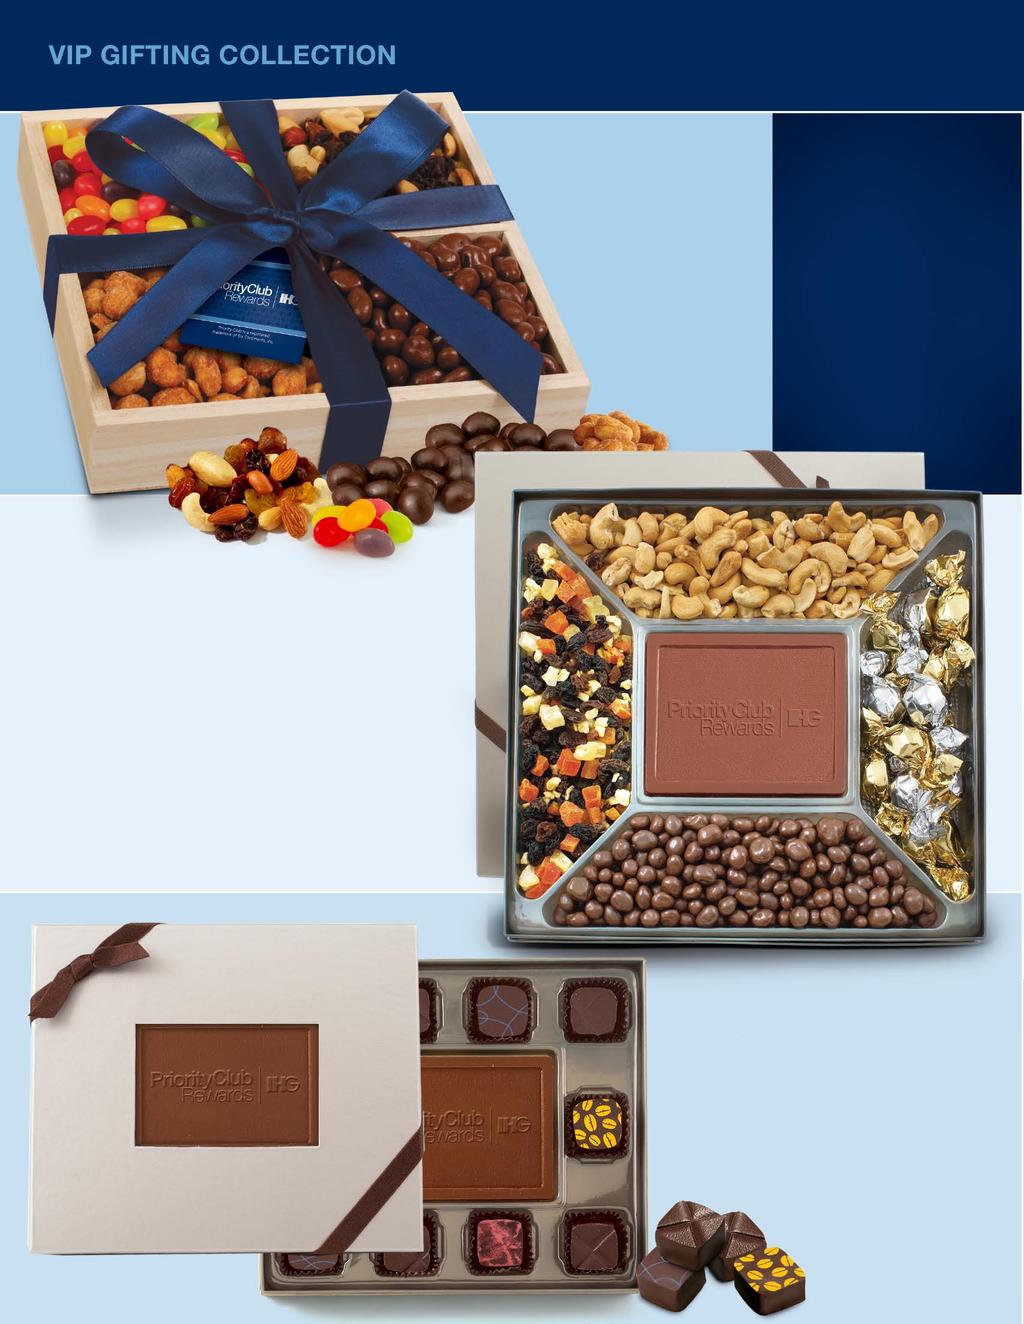 NN > Wooden Crate Tray Contains: Tropical Jelly Beans (3.5 oz), Chocolate Covered Raisins (3 oz), Honey Roasted Peanuts (2.